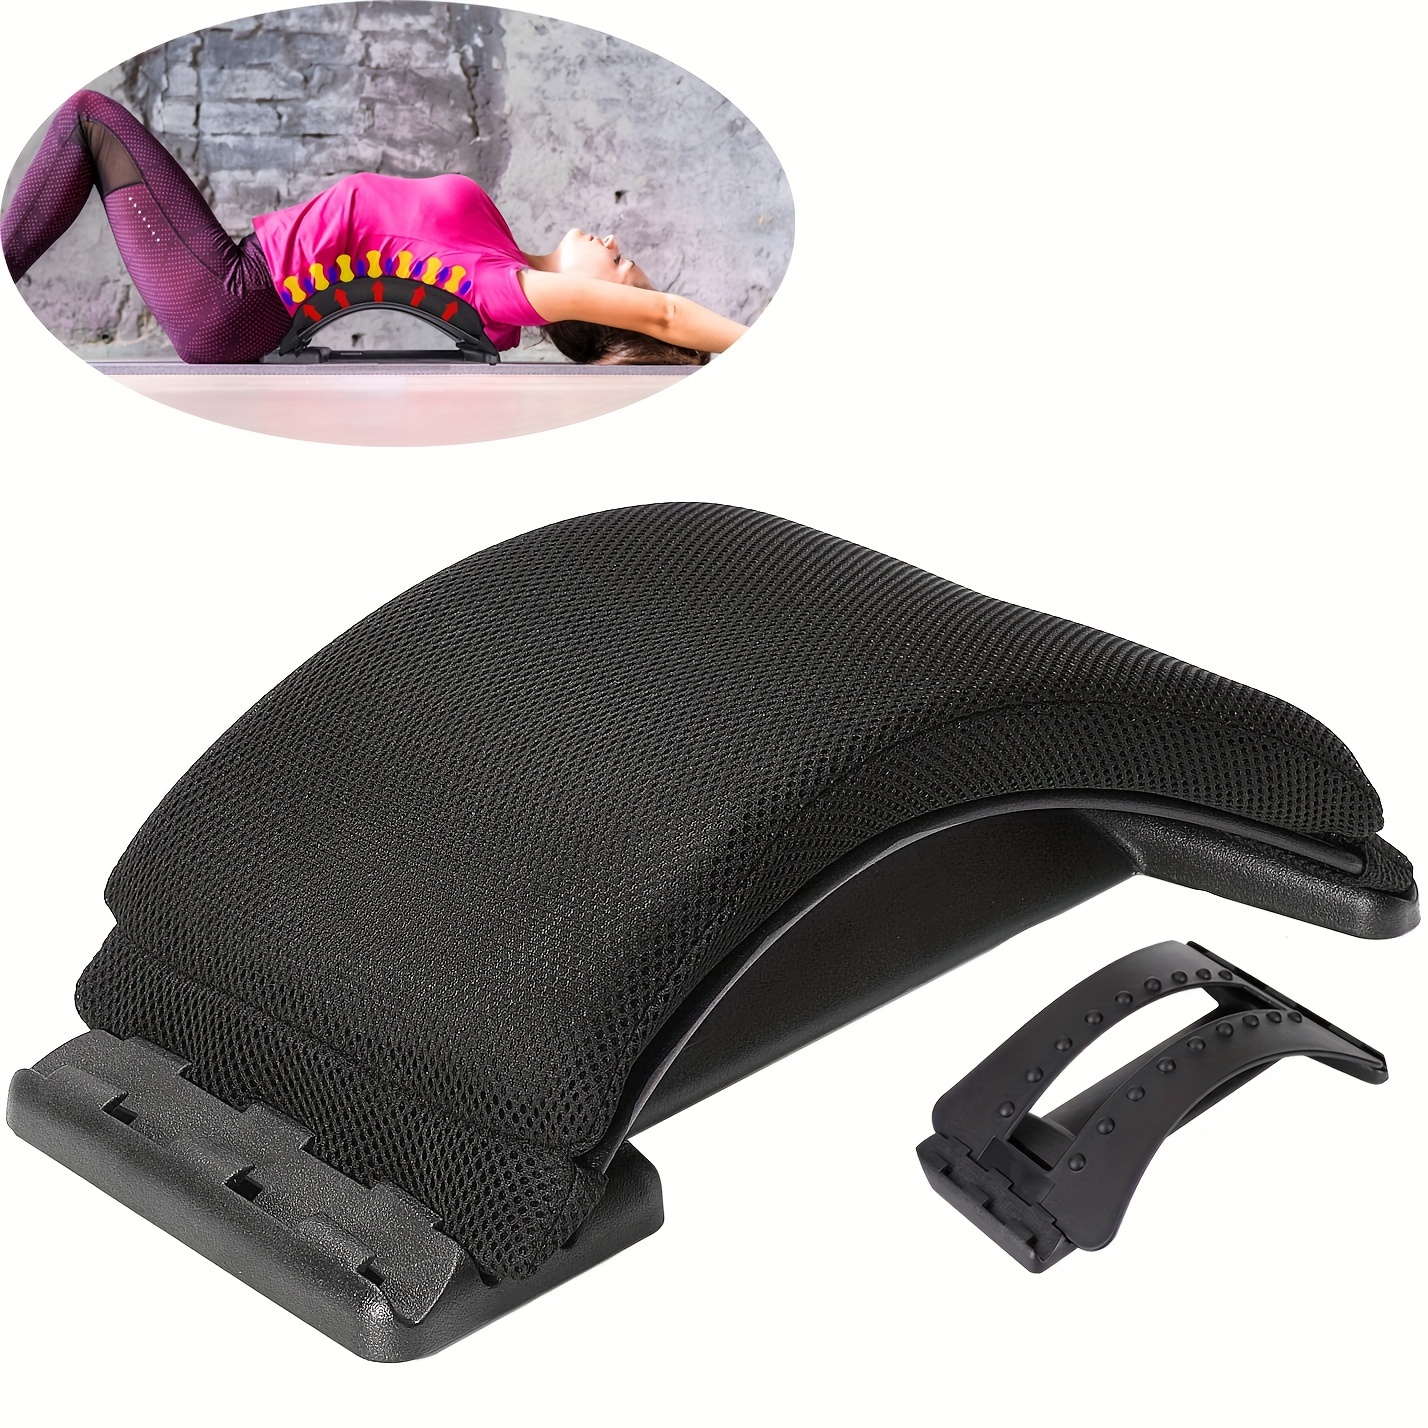 Inflatable Lumbar Pillow Adjustable Back Support Airbag Memory